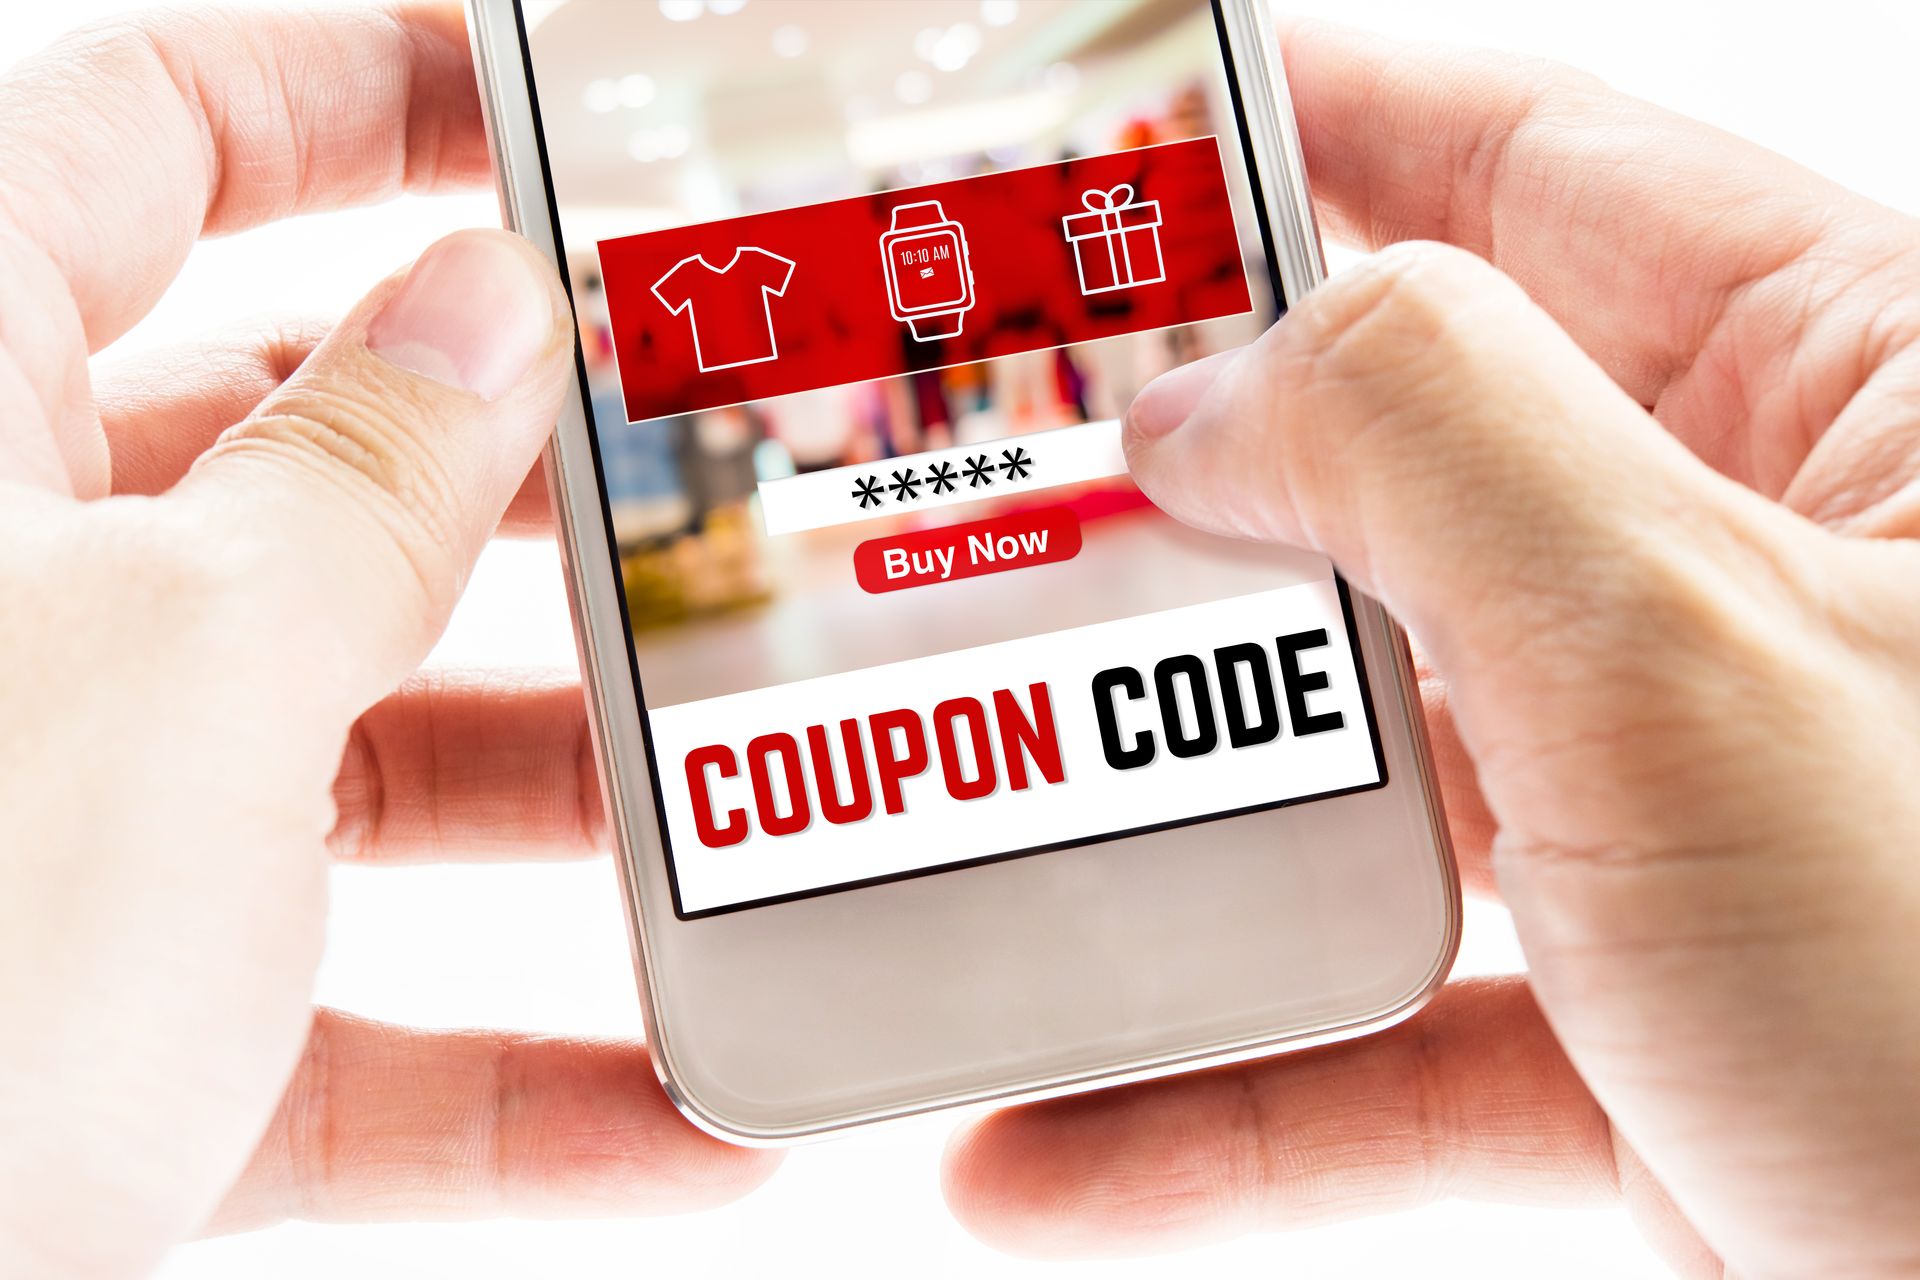 Going shopping online? How to save money with coupons?